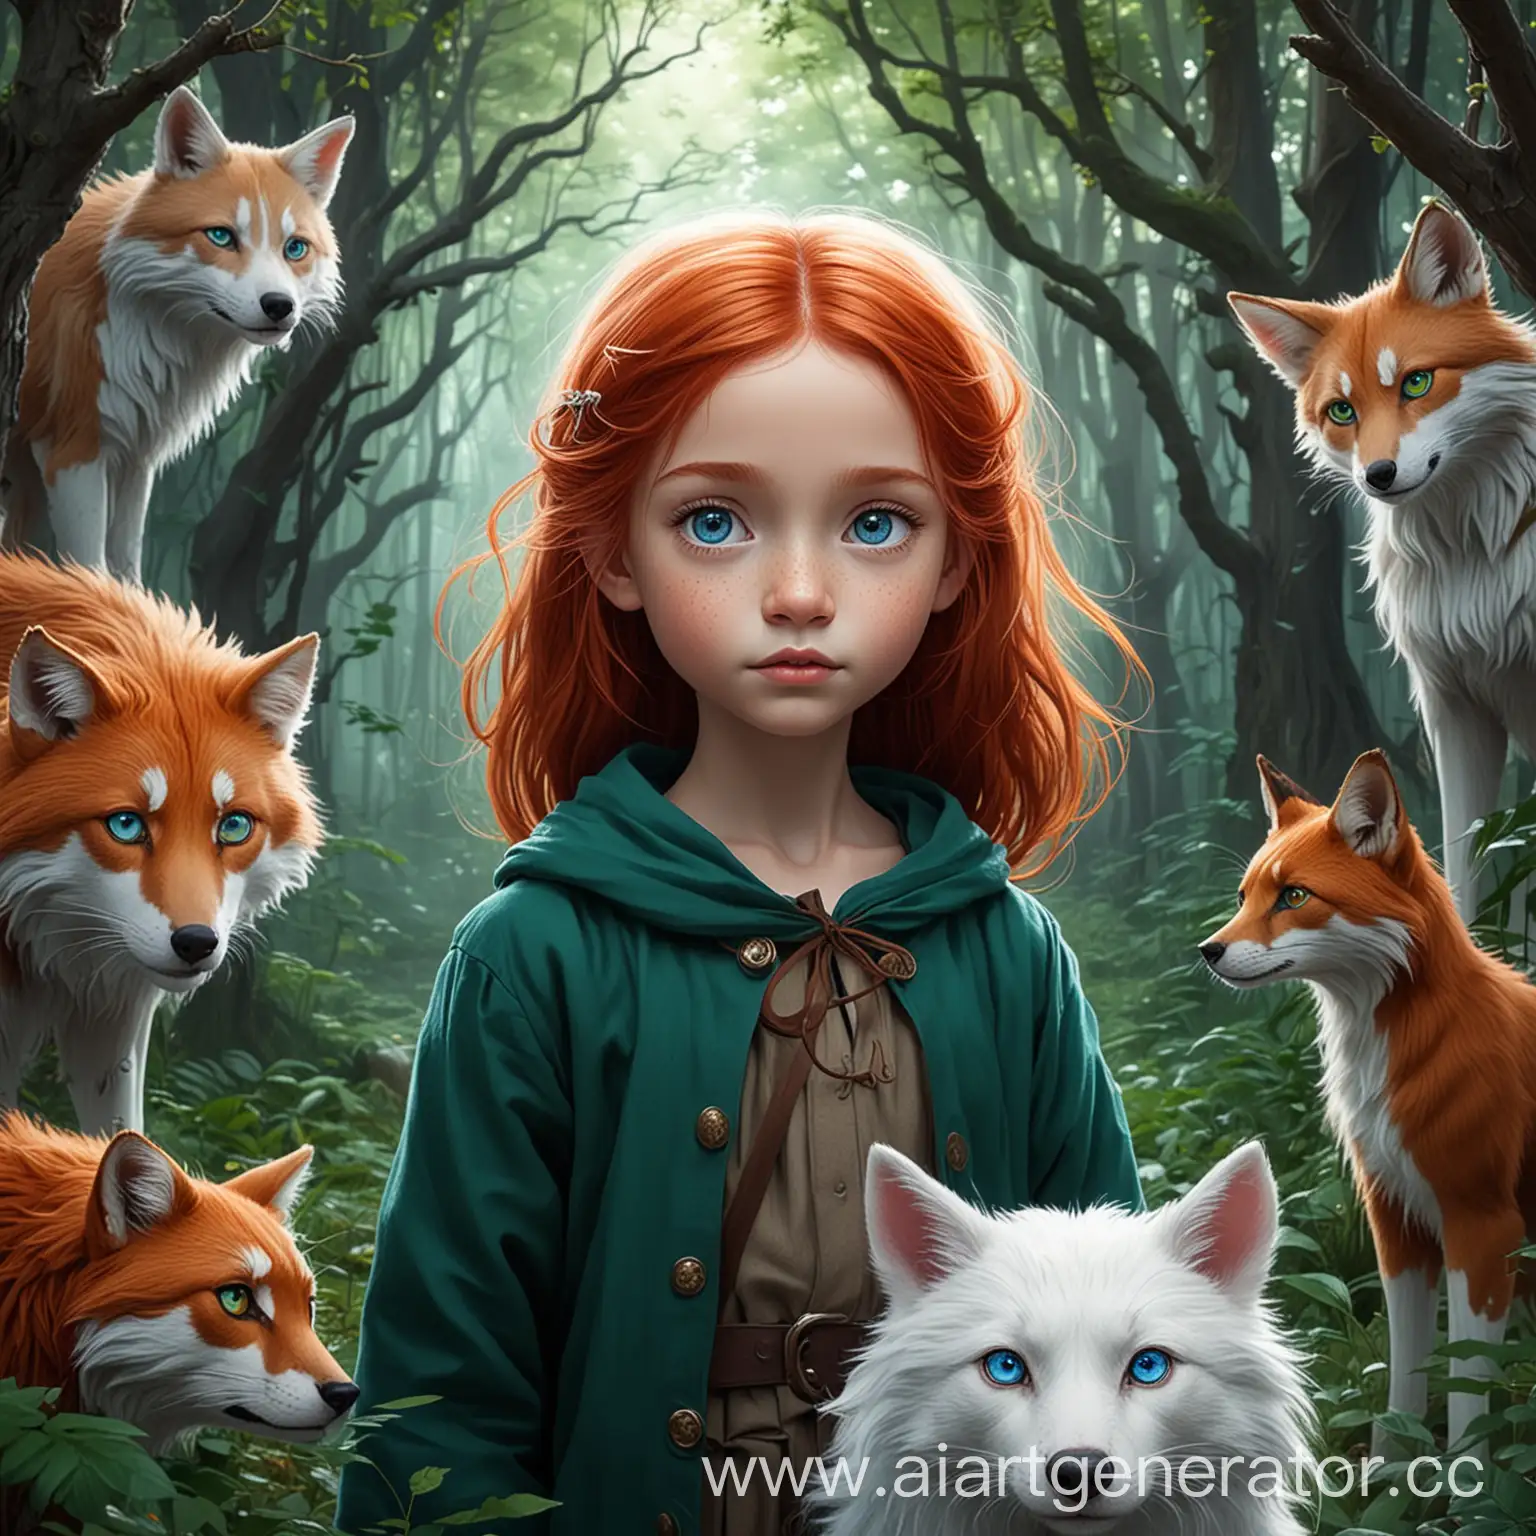 Enchanted-Forest-Adventure-with-Redhaired-Girl-and-Whitehaired-Boy